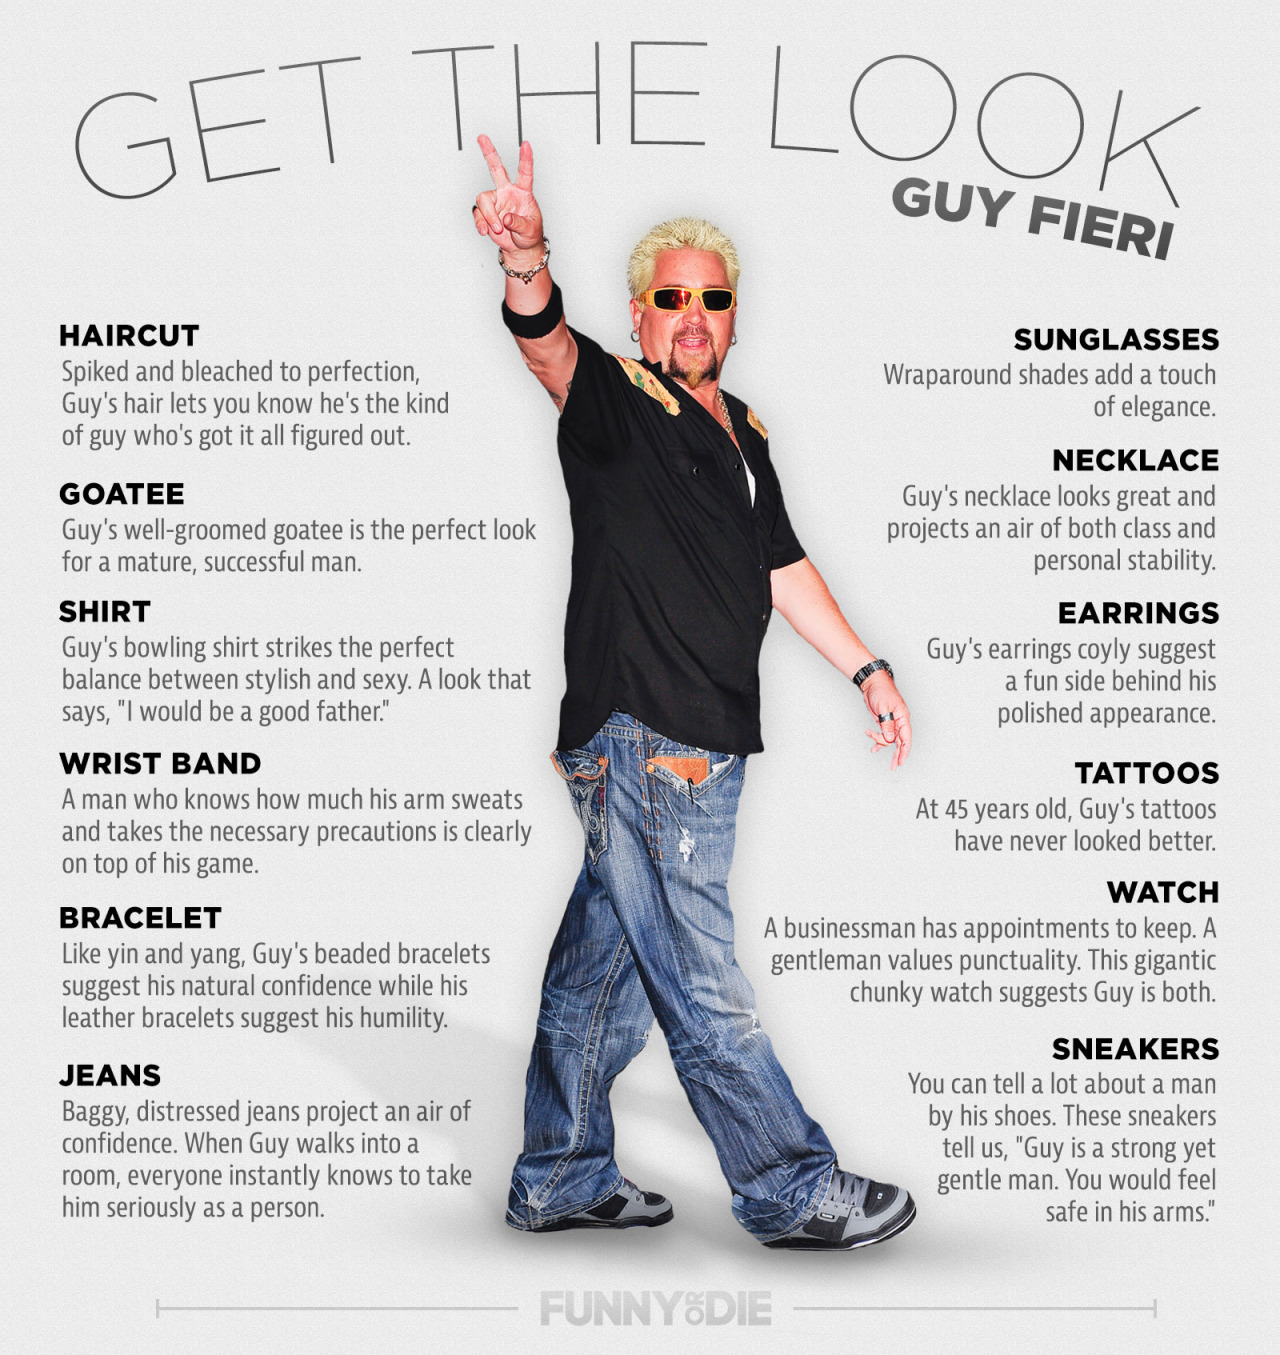 Get the Look: Guy Fieri
Looking as extreme as Guy is now extremely easy.